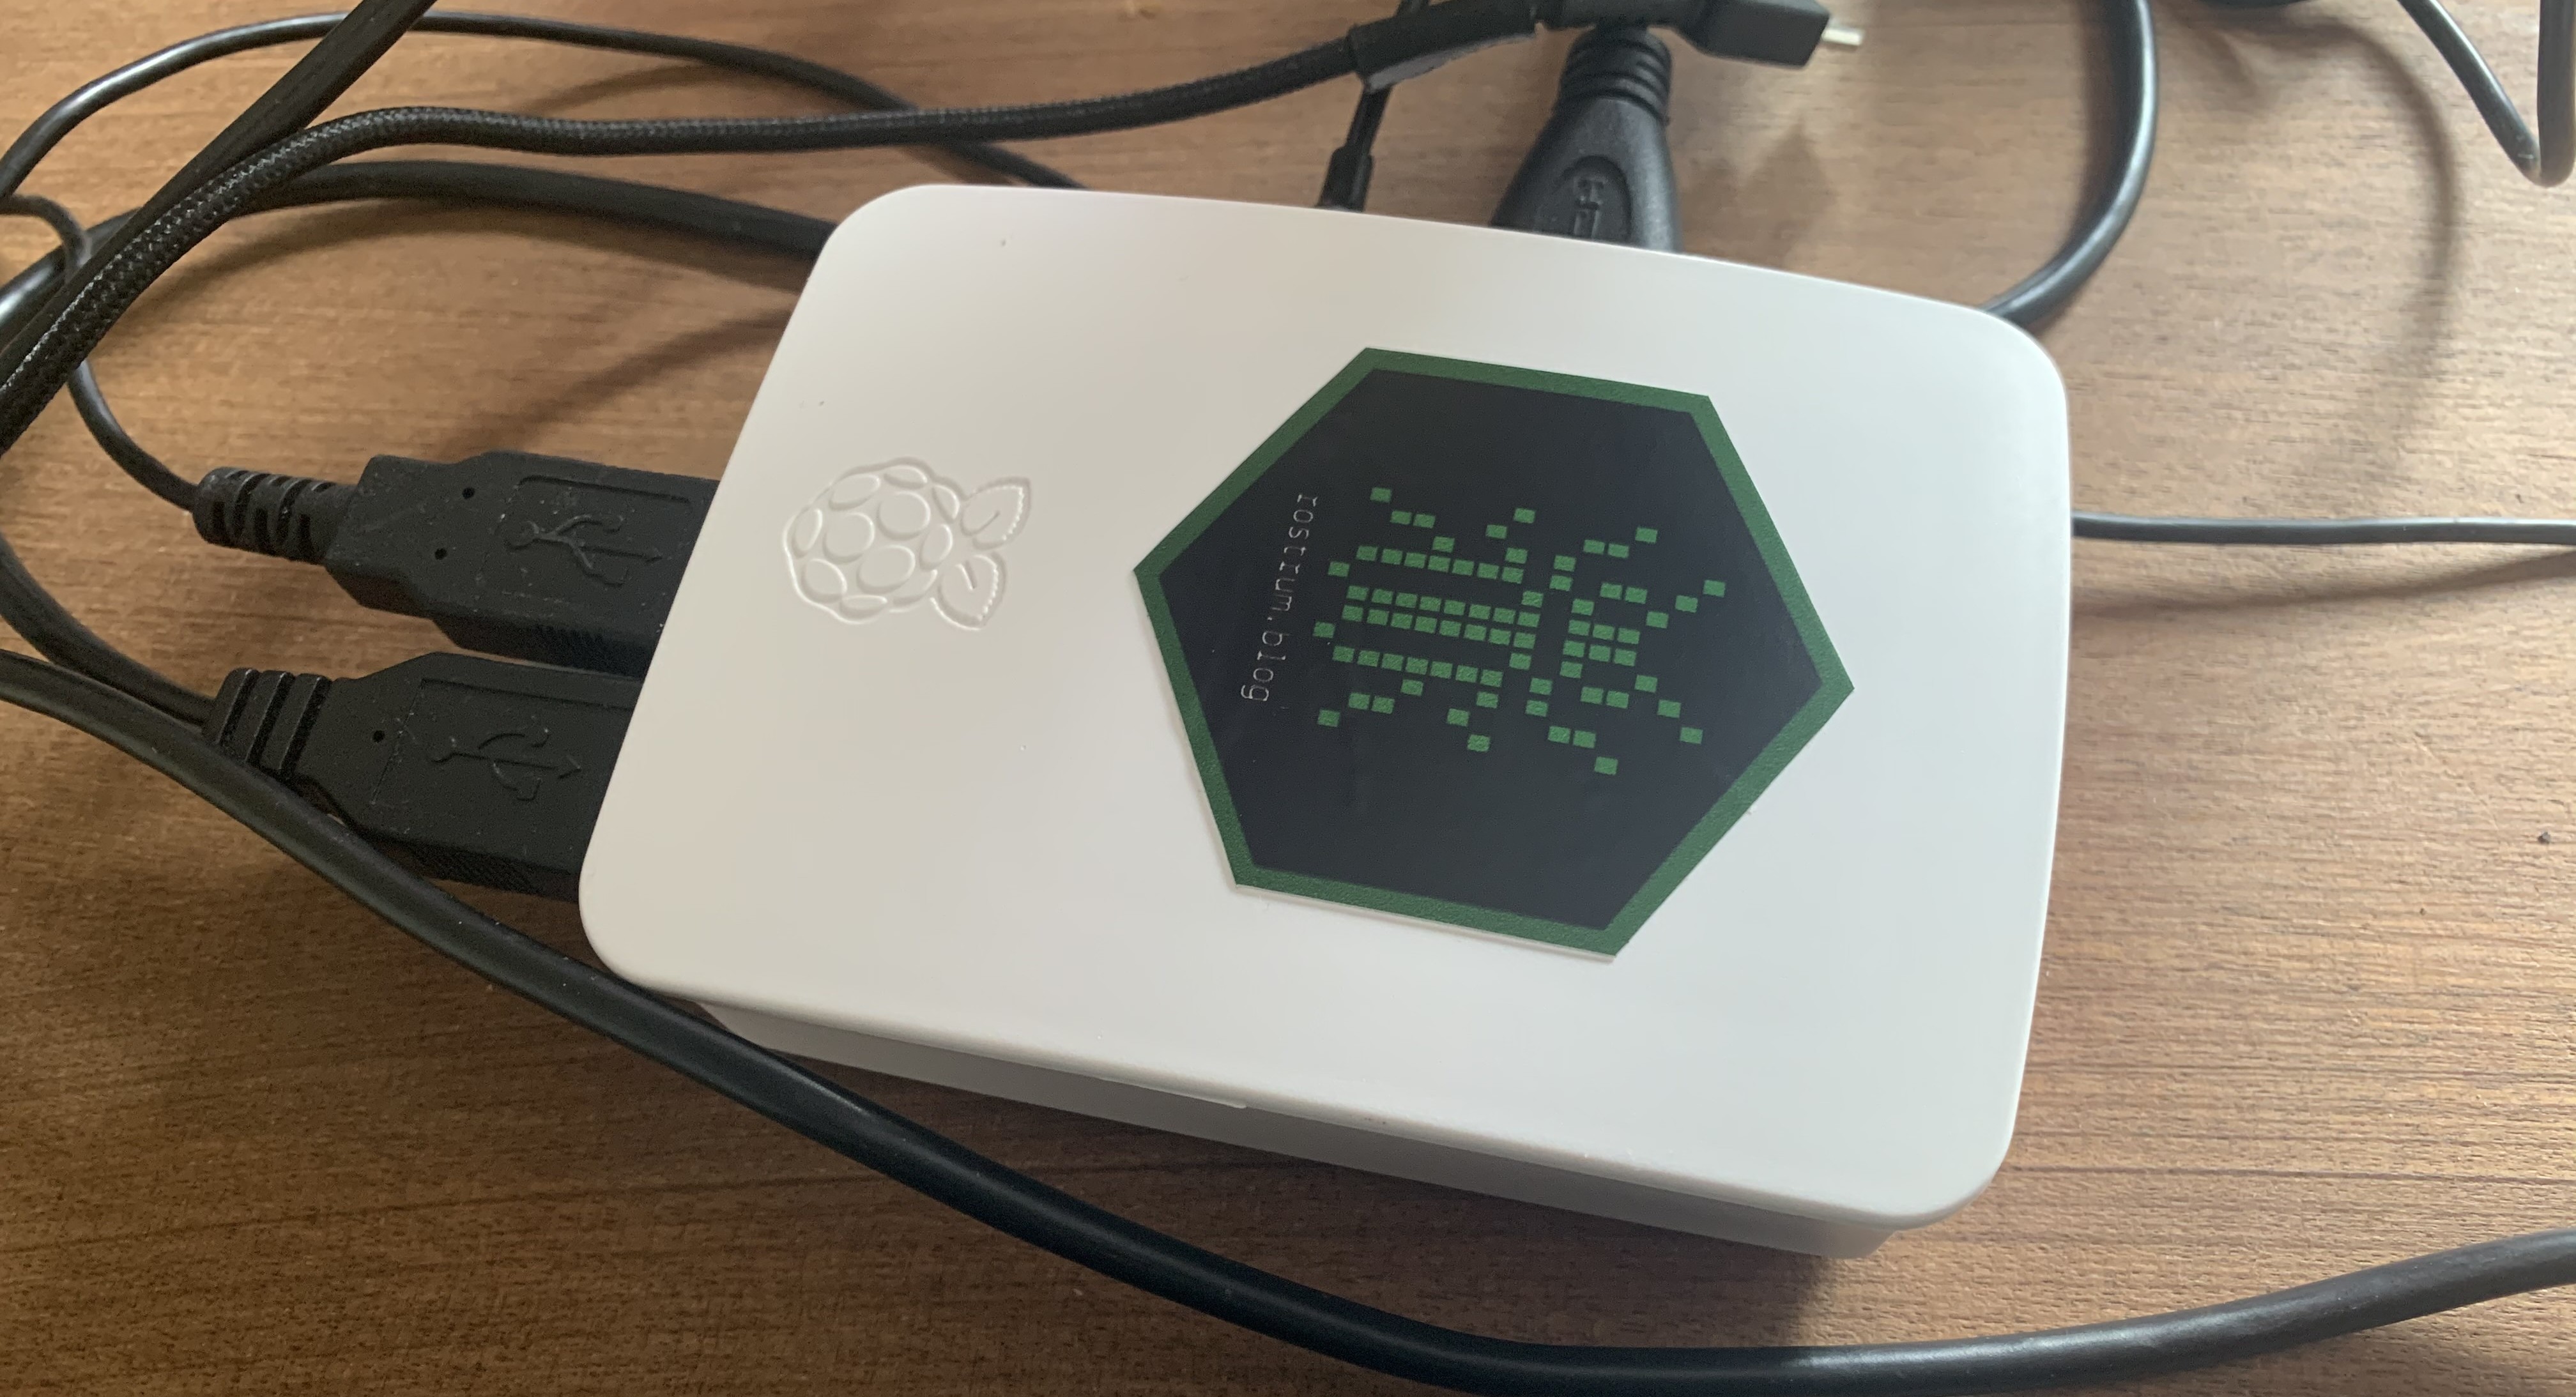 My Raspberry Pi 2 Model B housed in a white plastic case with a rostrum.blog sticker on the top.